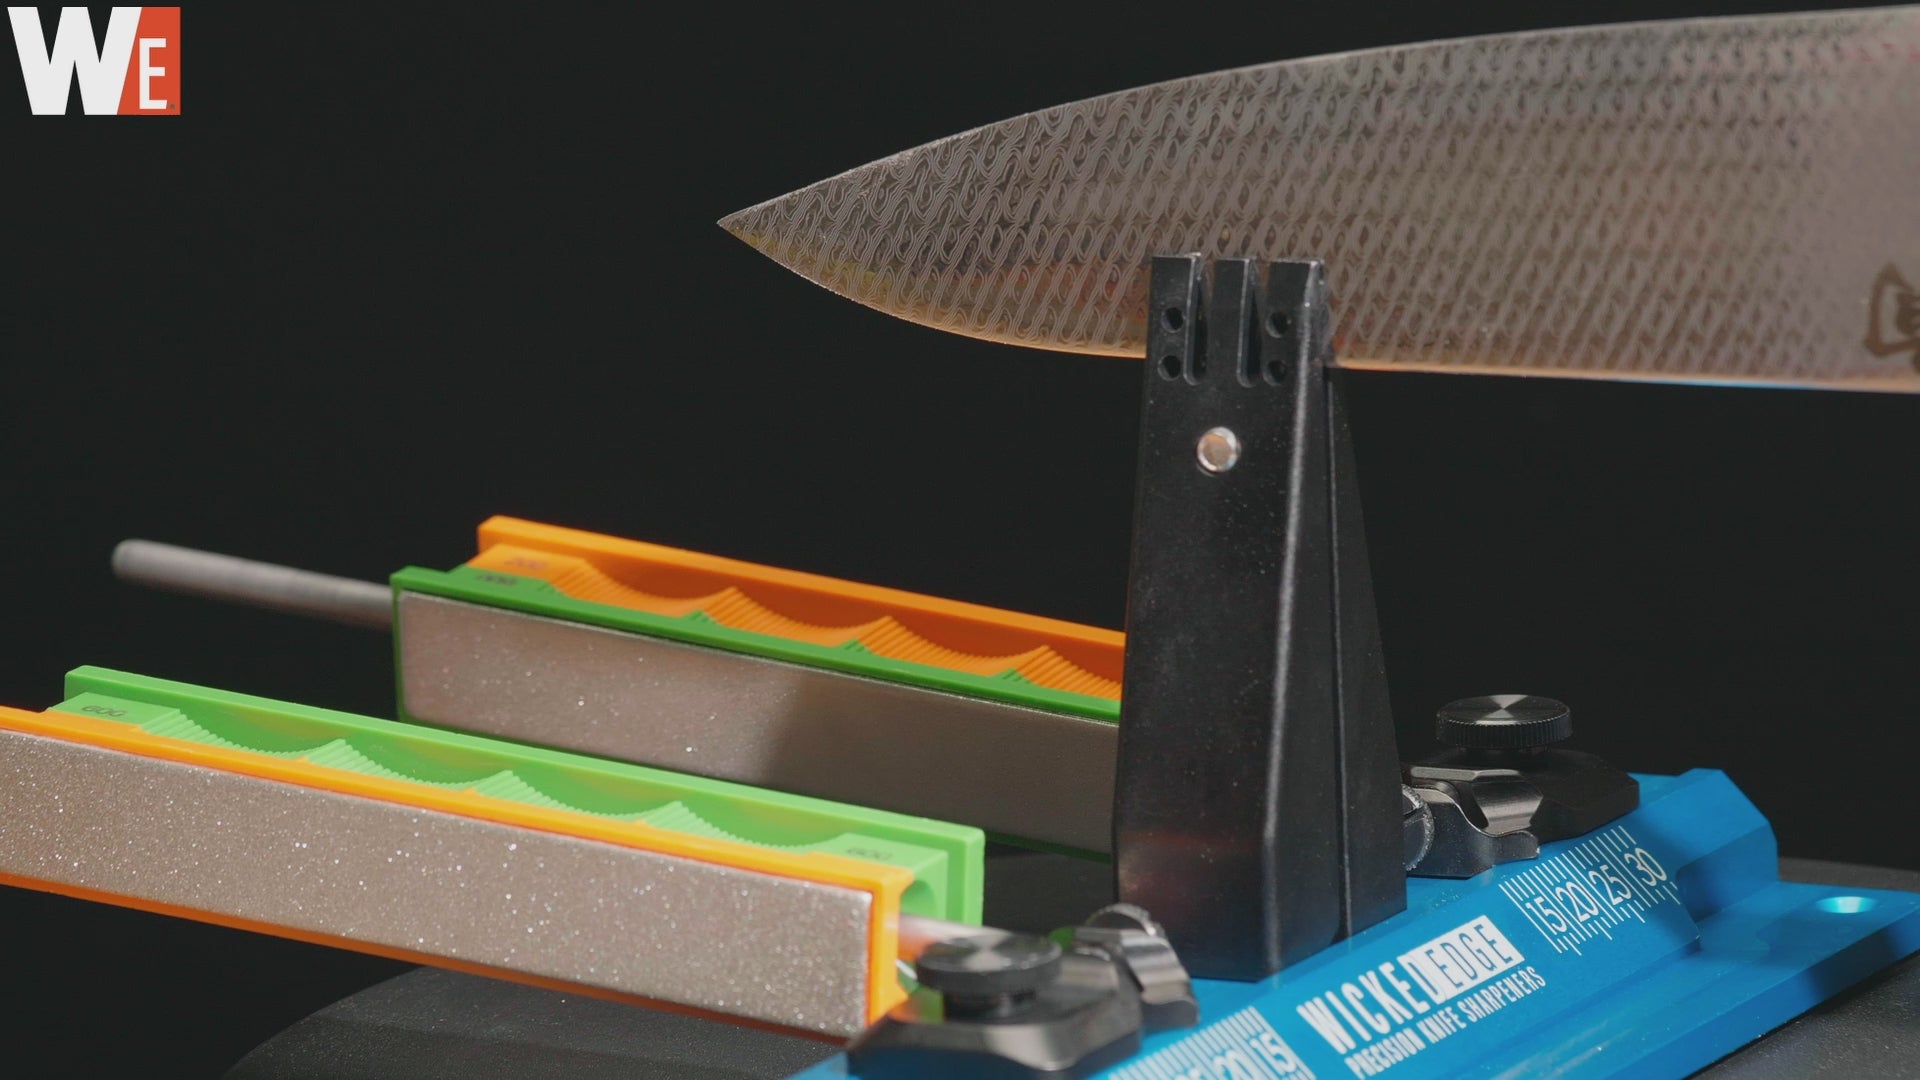 Wicked Edge Precision Knife Sharpeners